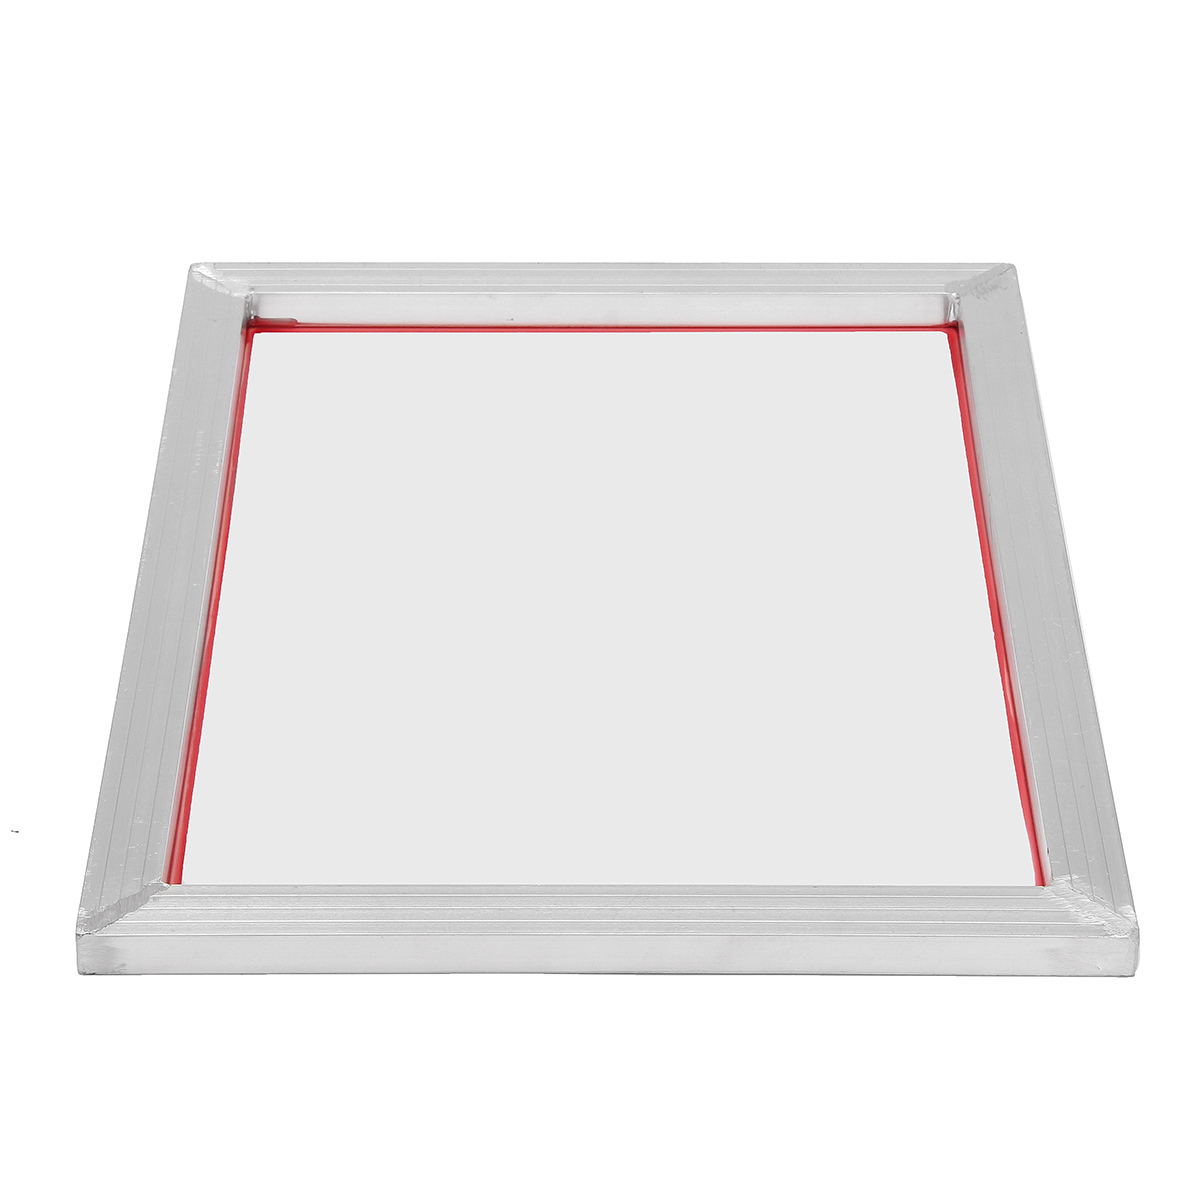 A3 Screen Printing Aluminium Frame Stretched With White 77T Silk Print Mesh 1